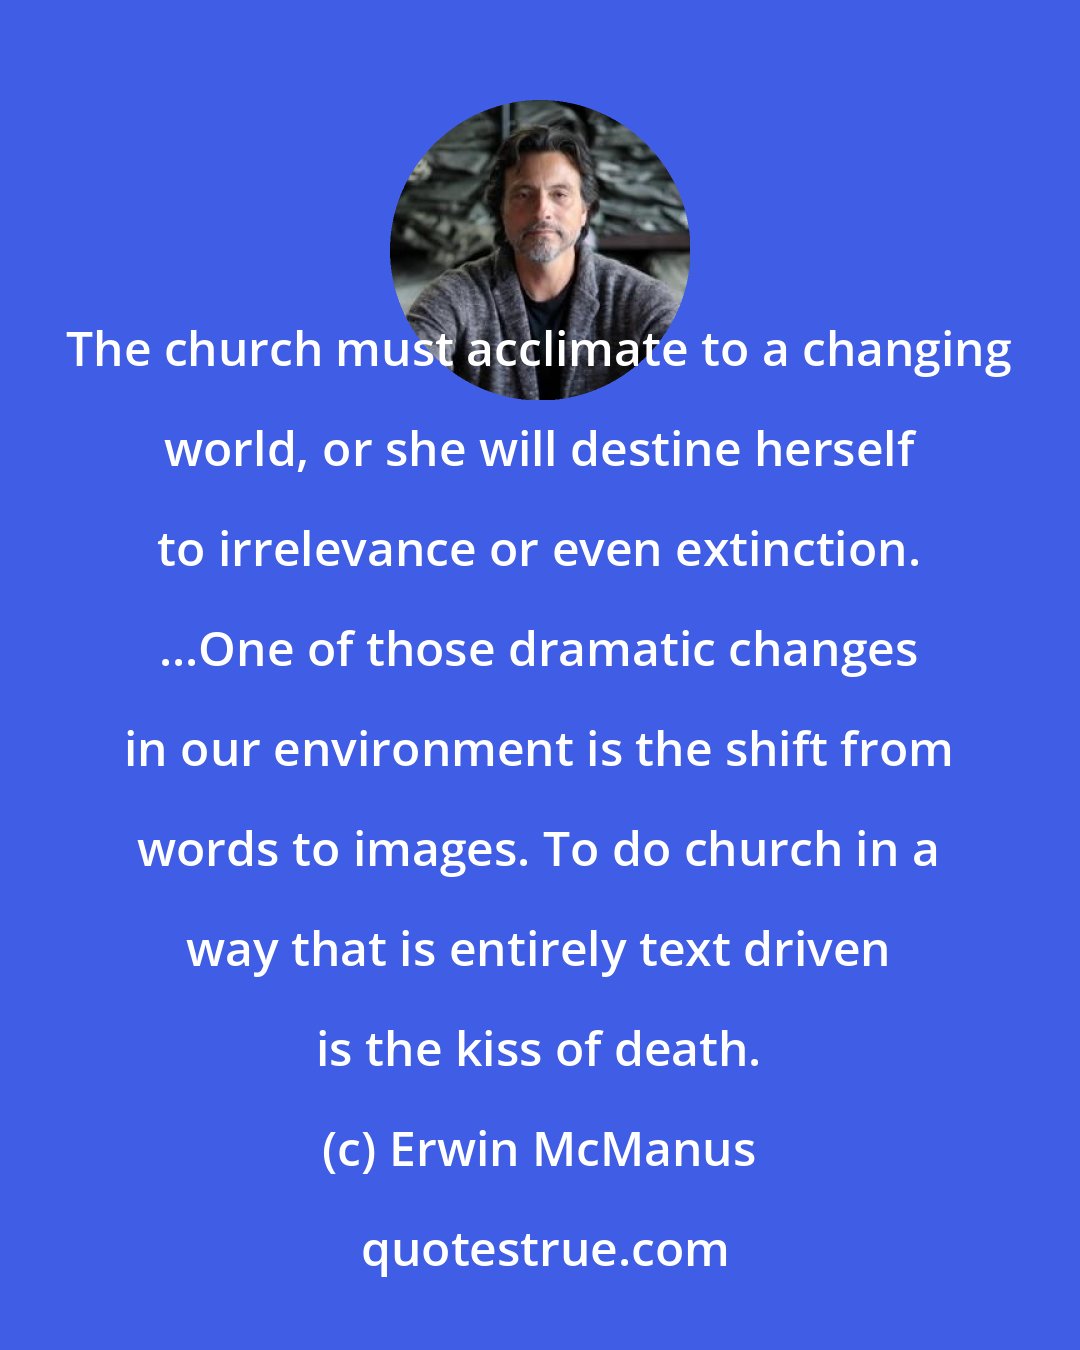 Erwin McManus: The church must acclimate to a changing world, or she will destine herself to irrelevance or even extinction. ...One of those dramatic changes in our environment is the shift from words to images. To do church in a way that is entirely text driven is the kiss of death.